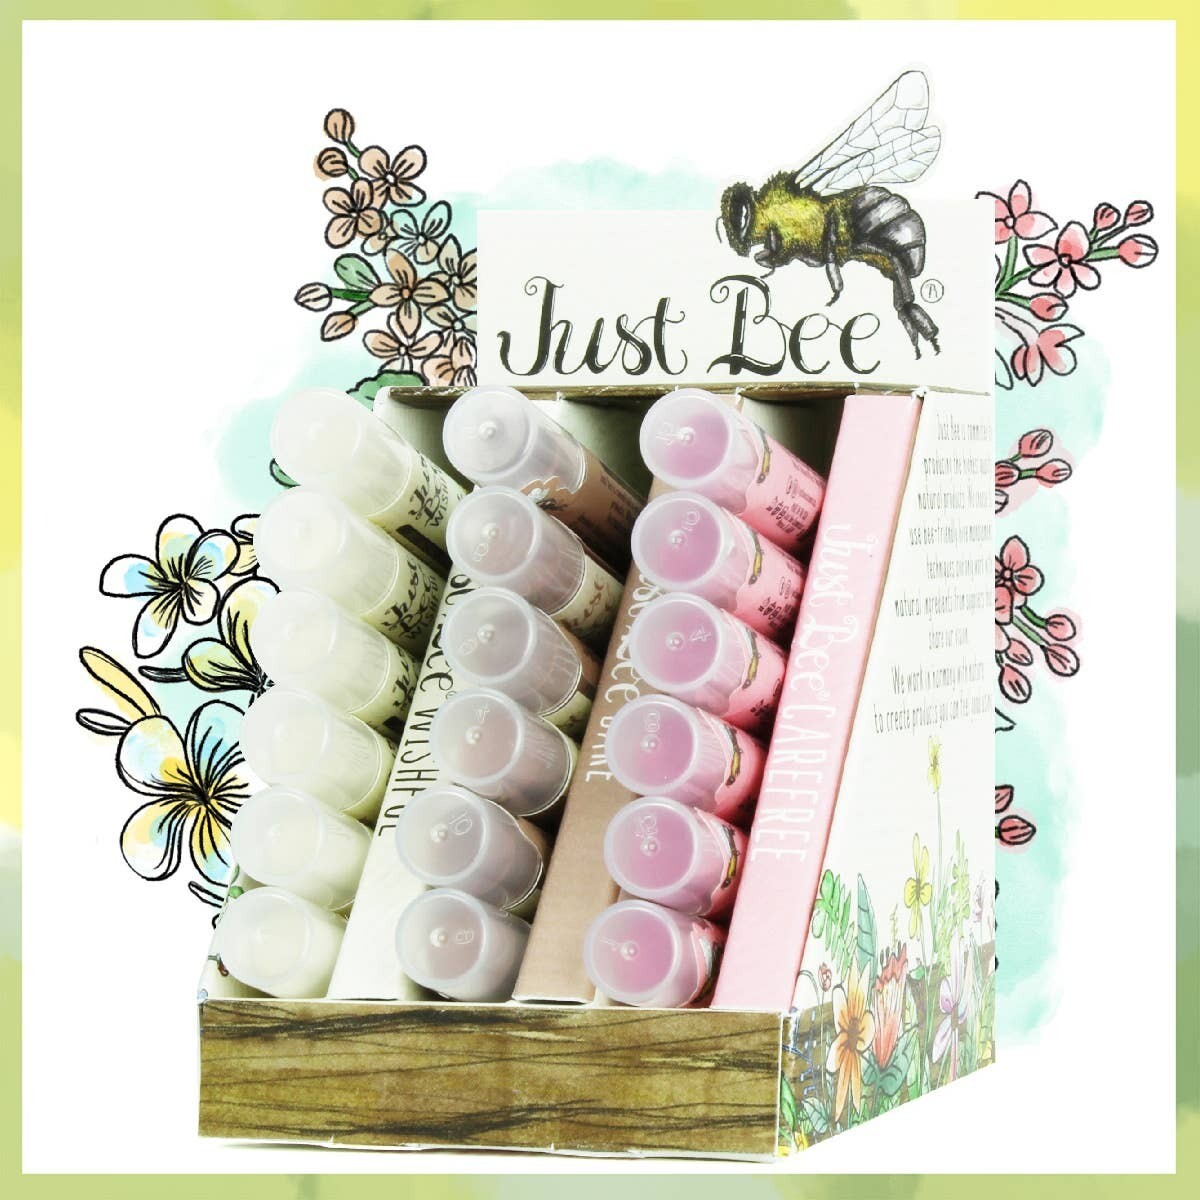 Just Bee Shimmer Lip Balm